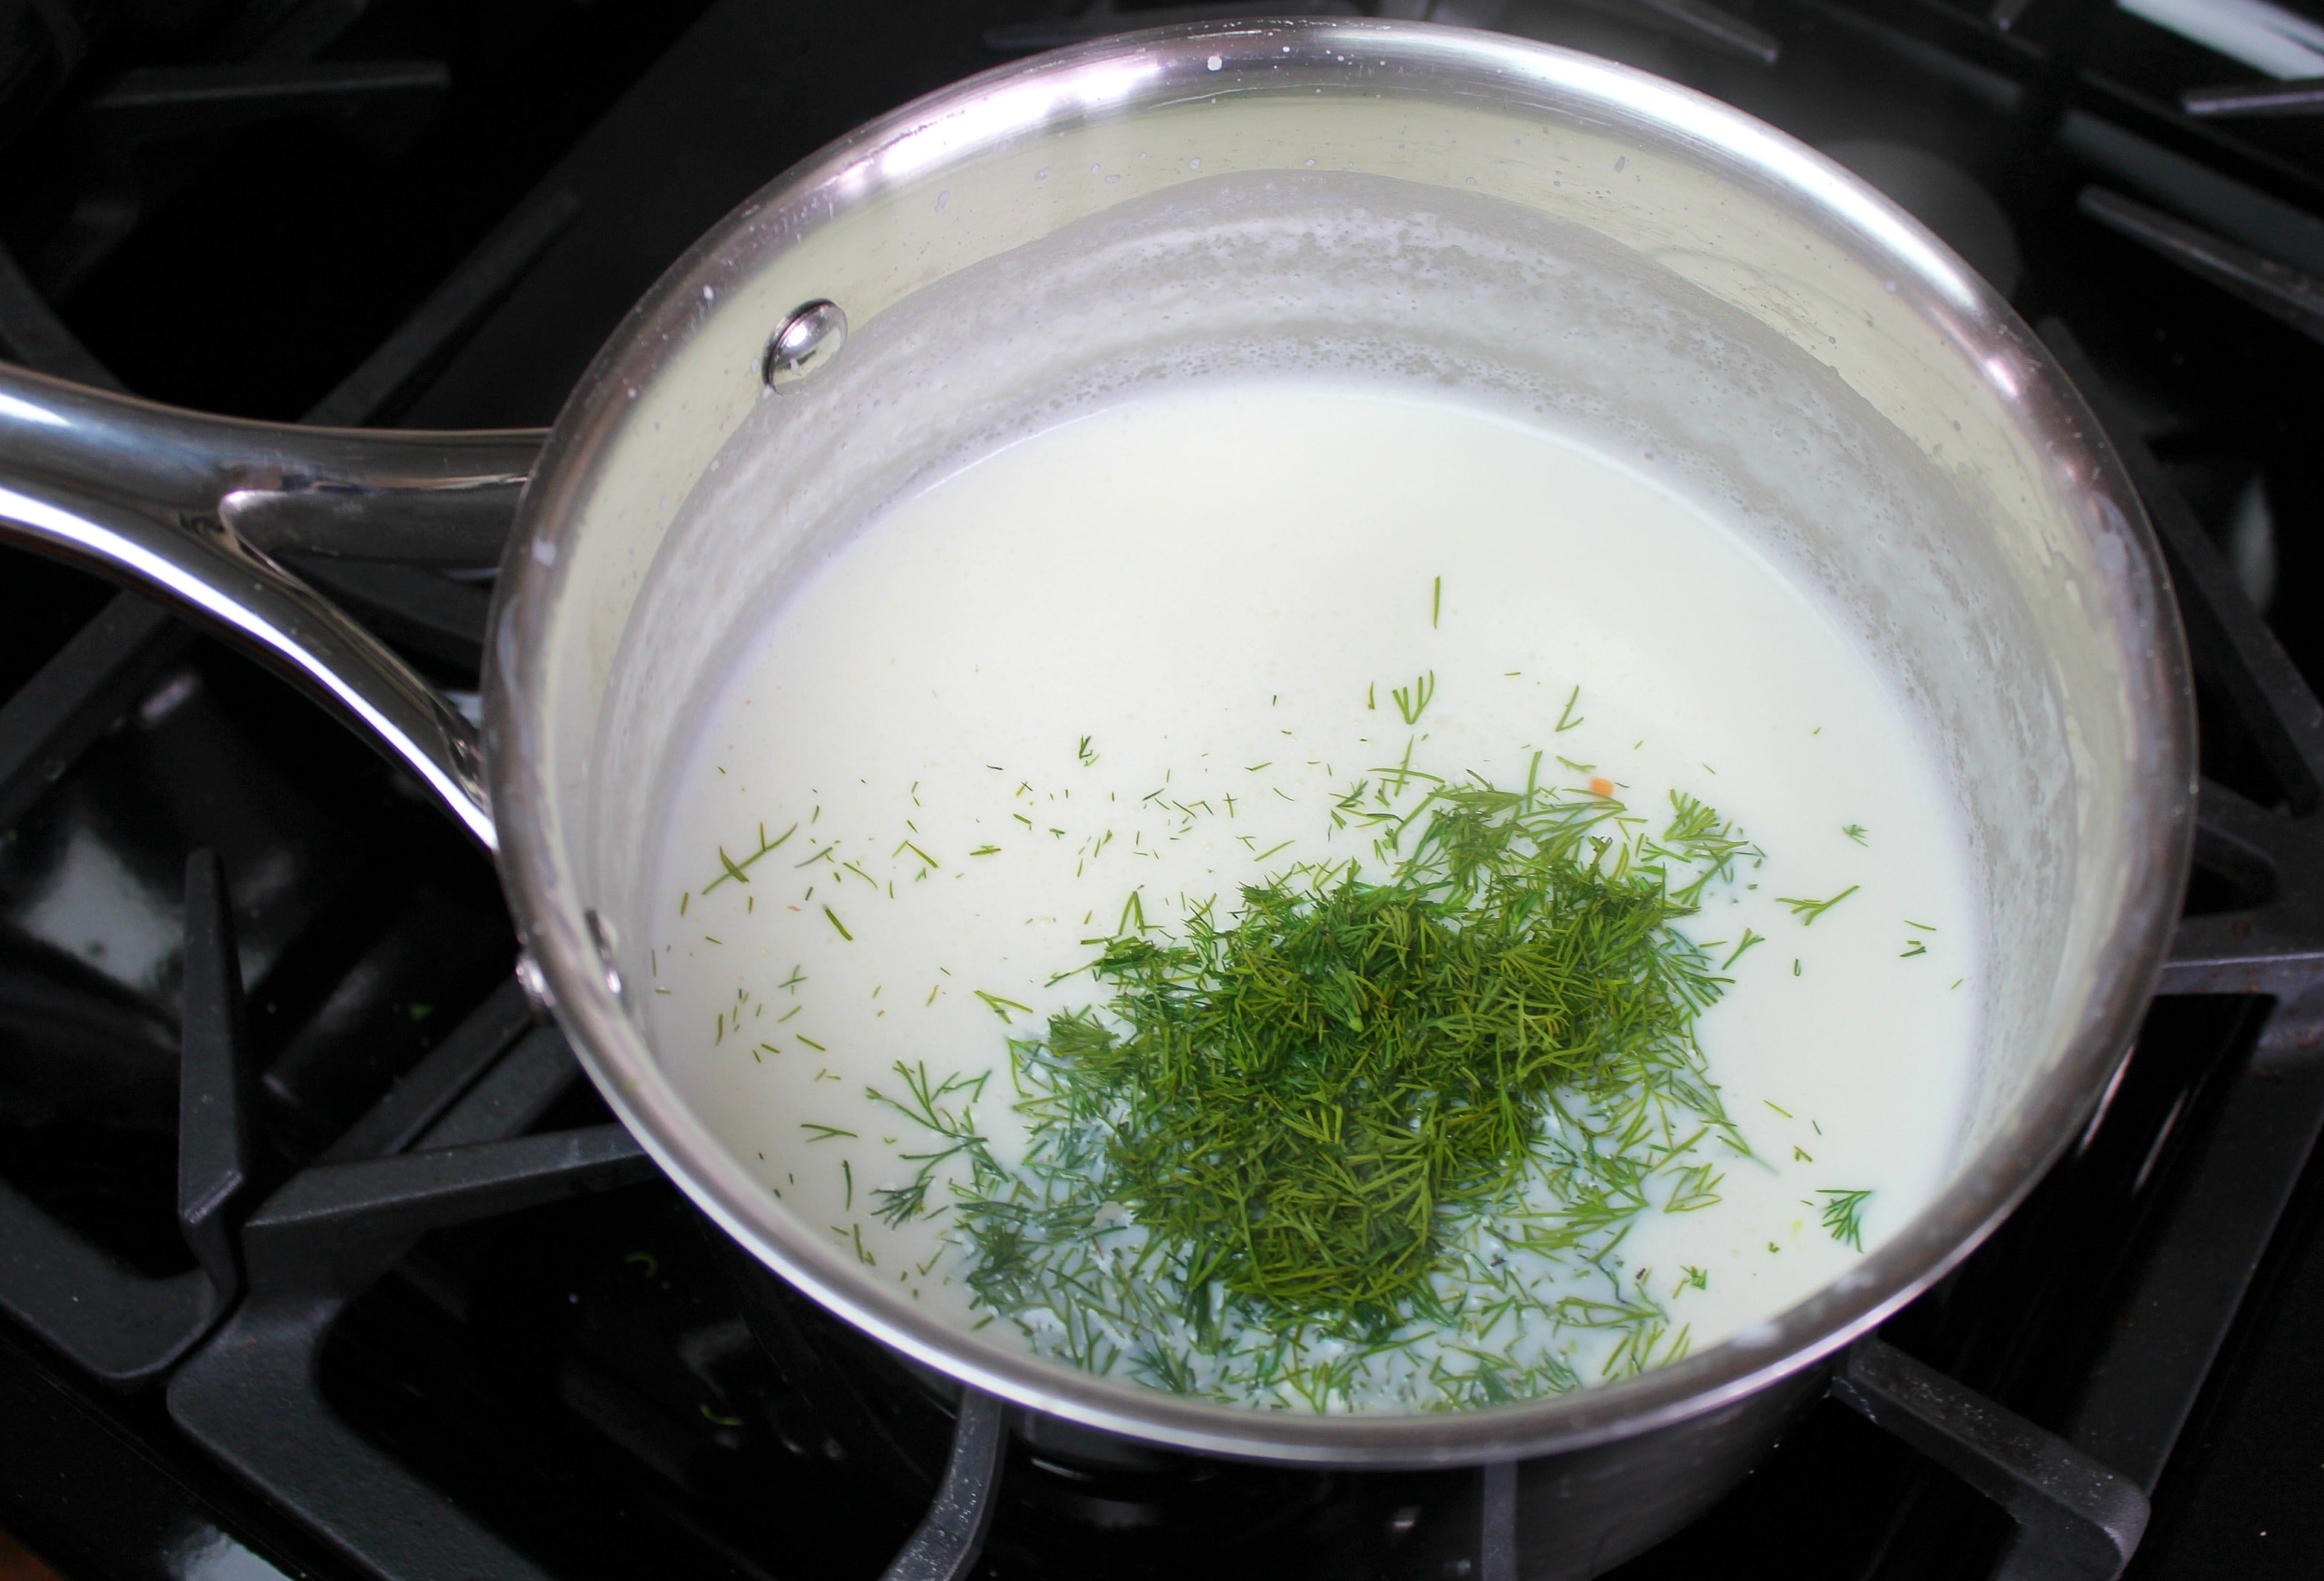 Mix butter, flour, milk, and dill together in a saucepan over medium heat to make a roux. 